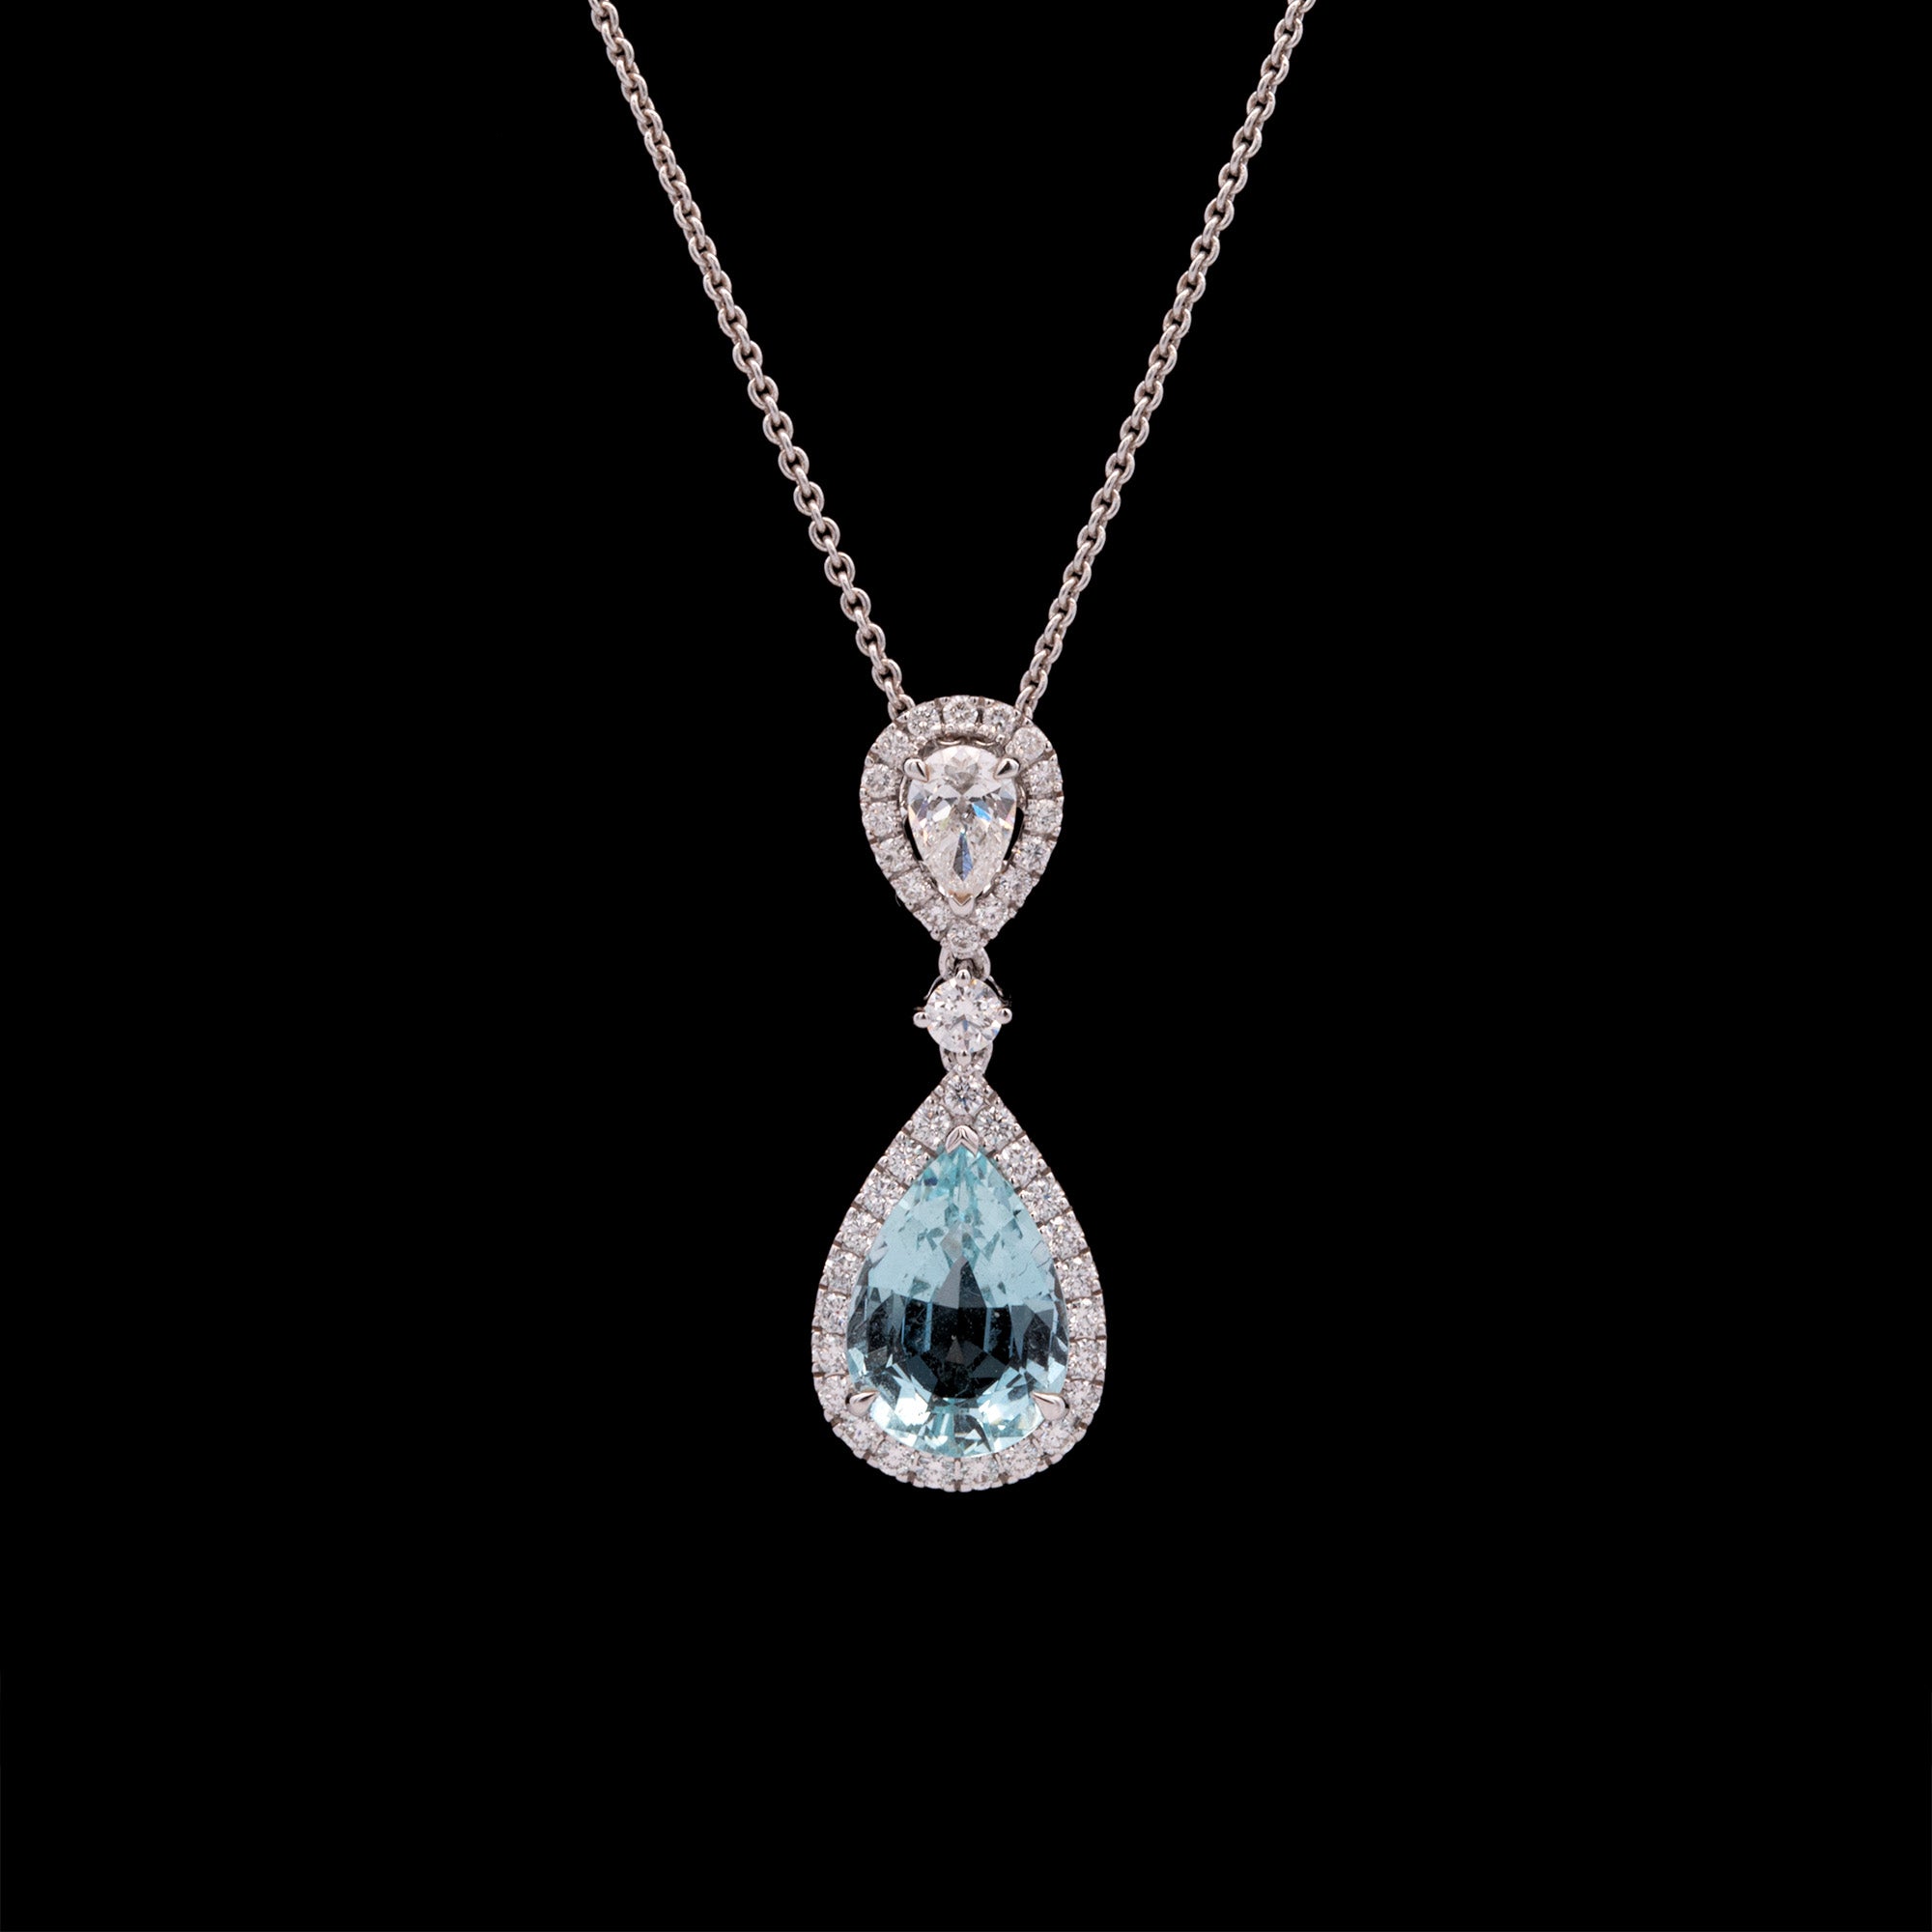 Buy Genuine Aquamarine Necklace for Women, Dainty Teardrop Gemstone Necklace,  Aquamarine Pendant, March Birthstone Jewelry, Gift for Her Online in India  - Etsy